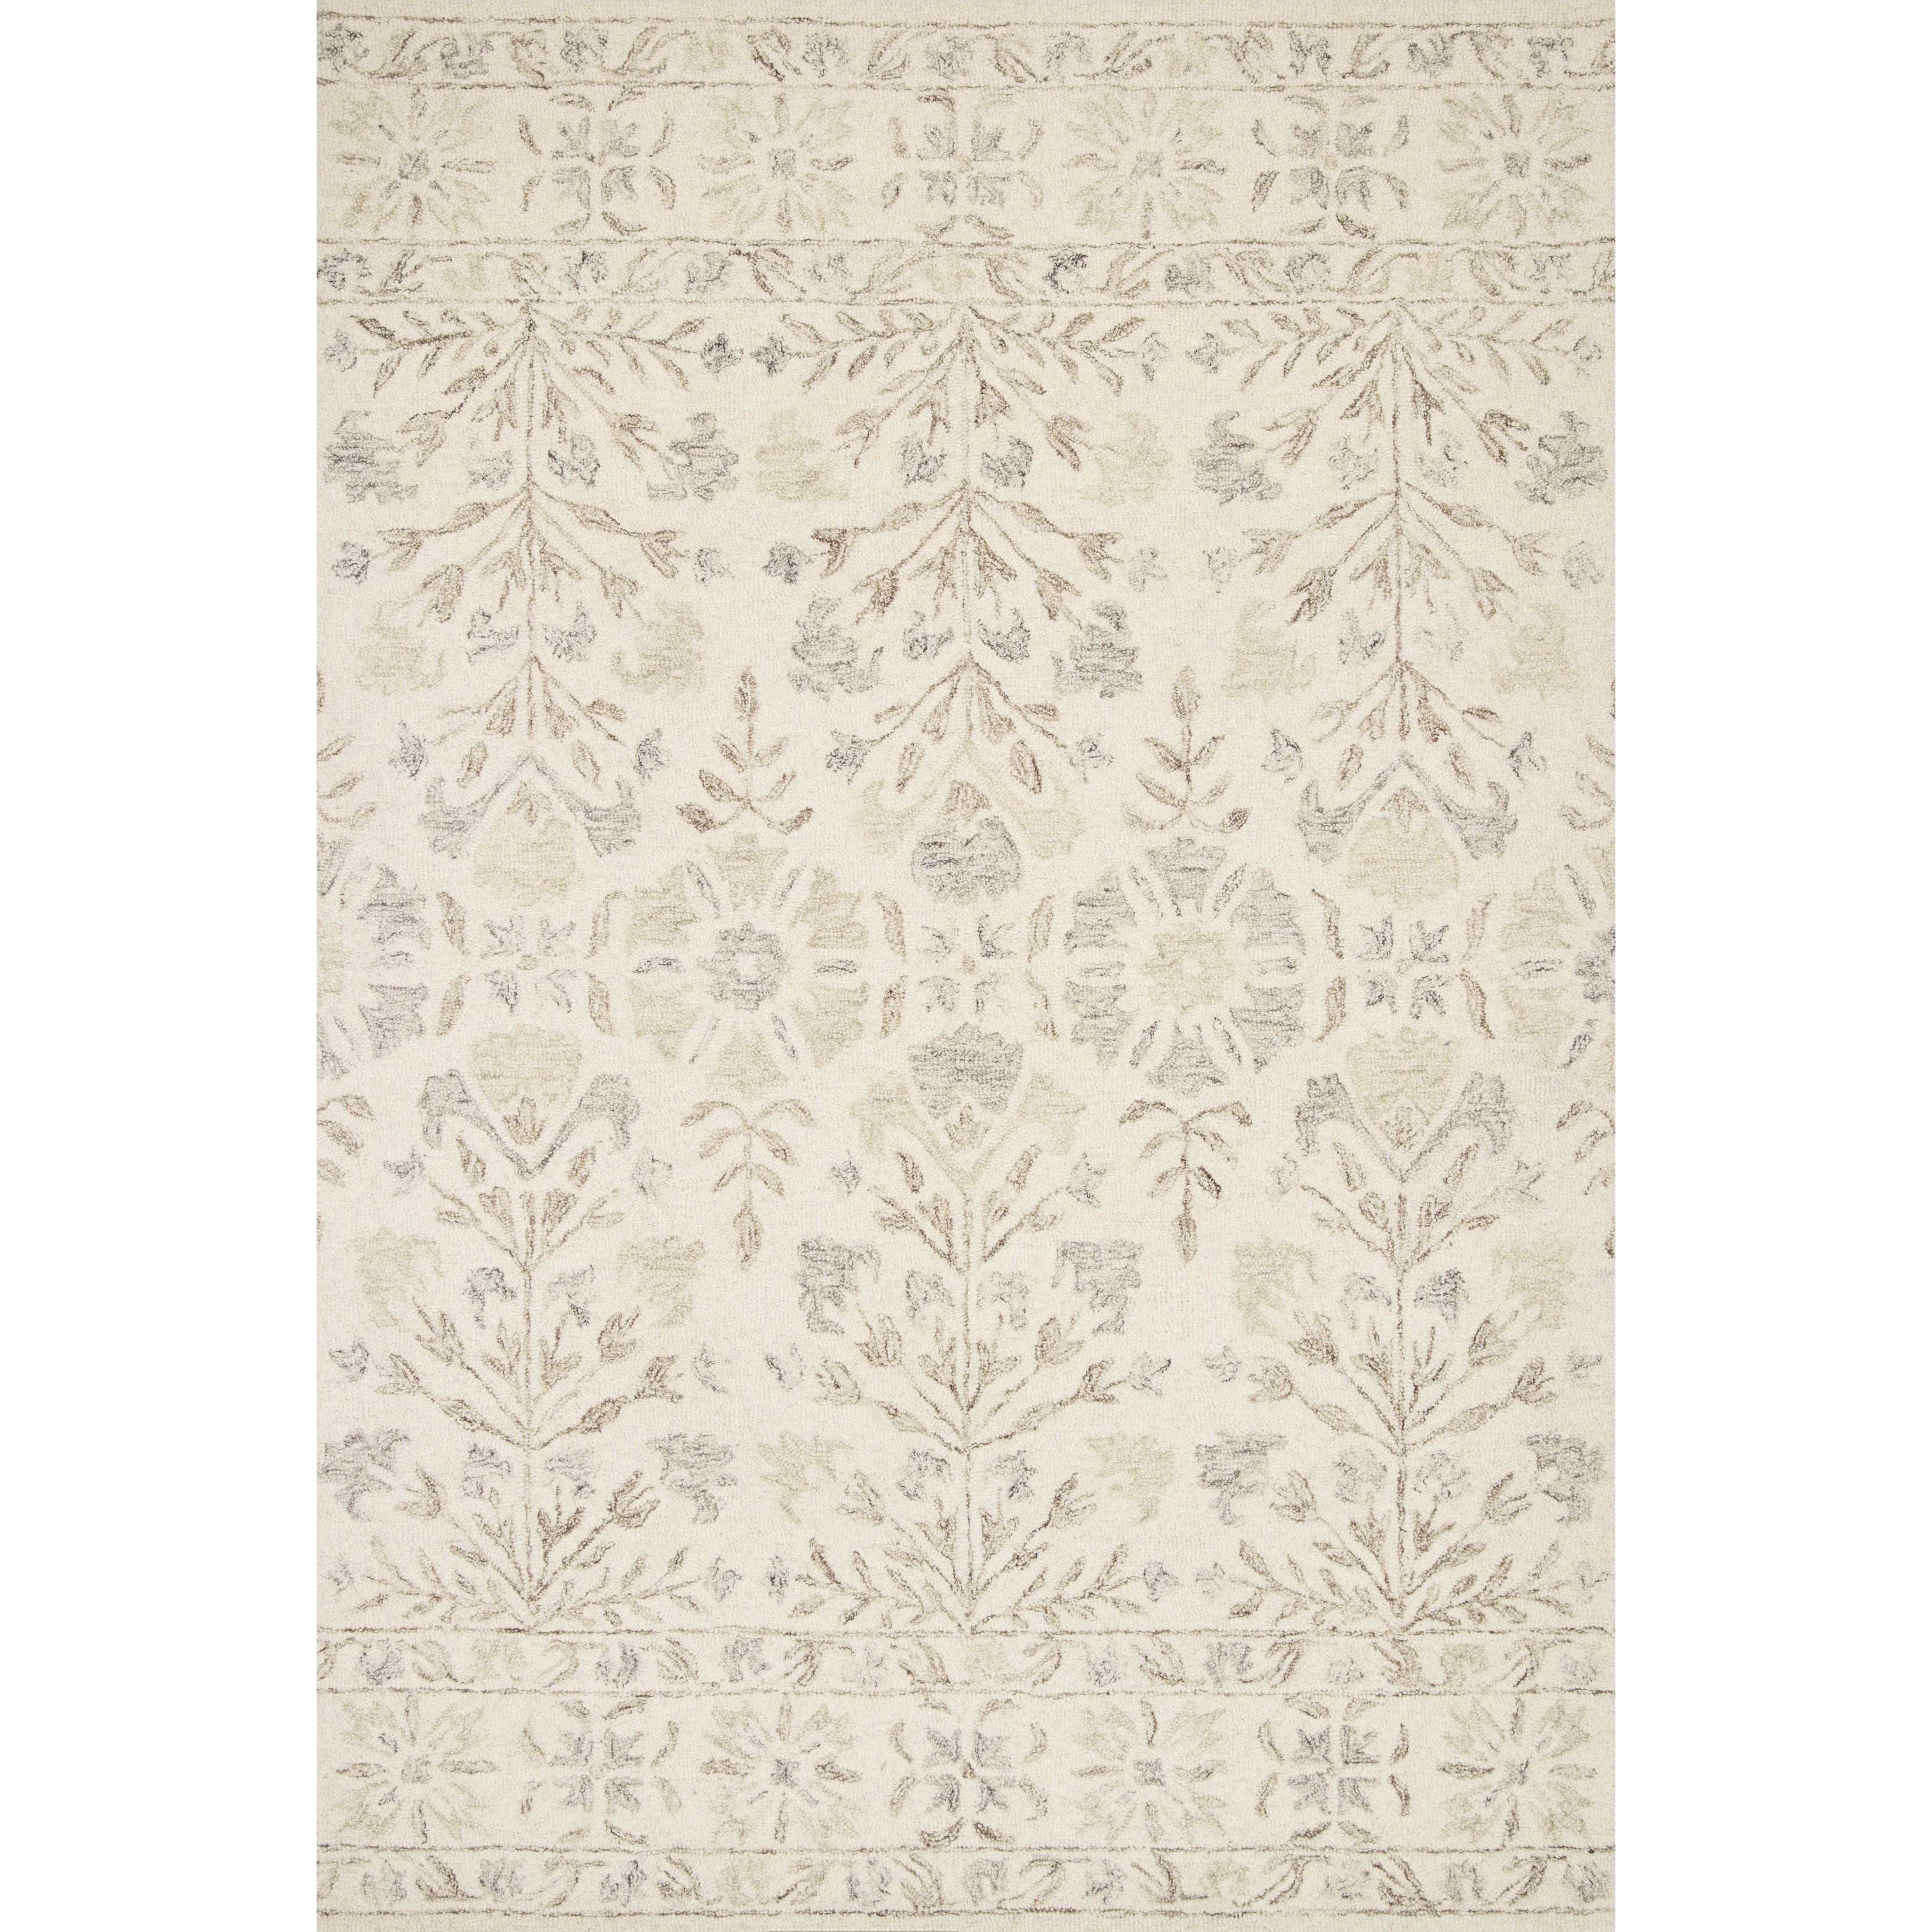 Perfect for families with kids and pets and easy to clean and maintain. Comes in area, cute kitchen and hallway runner sizes. The rug warms up any room with tones of ivory and taupe in soft, natural 100% wool. The Norabel Ivory / Neutral rug from Loloi captures the spirit of coziness and beautiful botanical motifs.